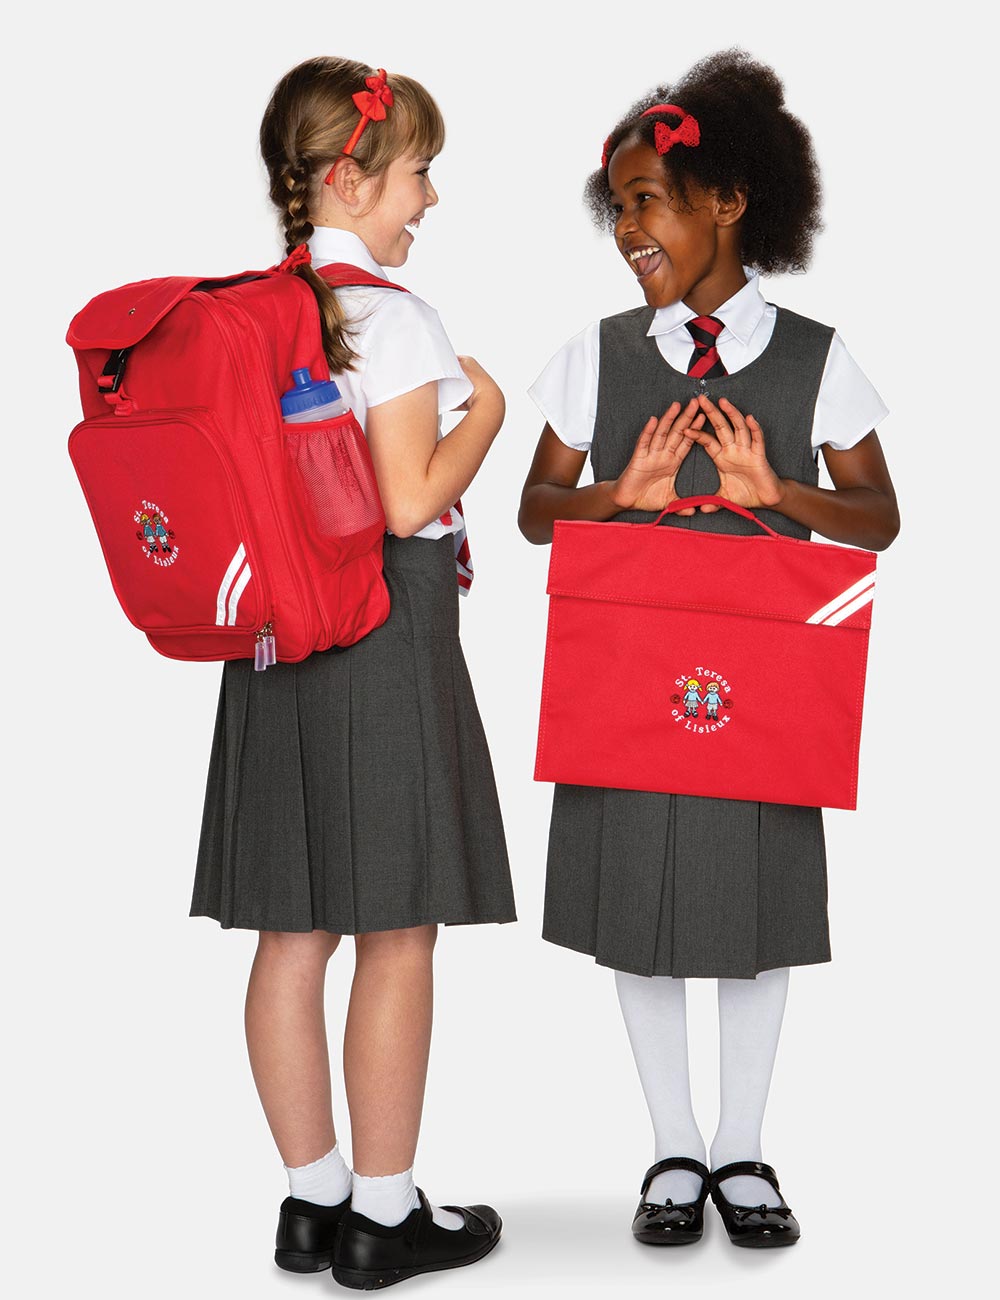 William Turn 2 young school girls with red bags